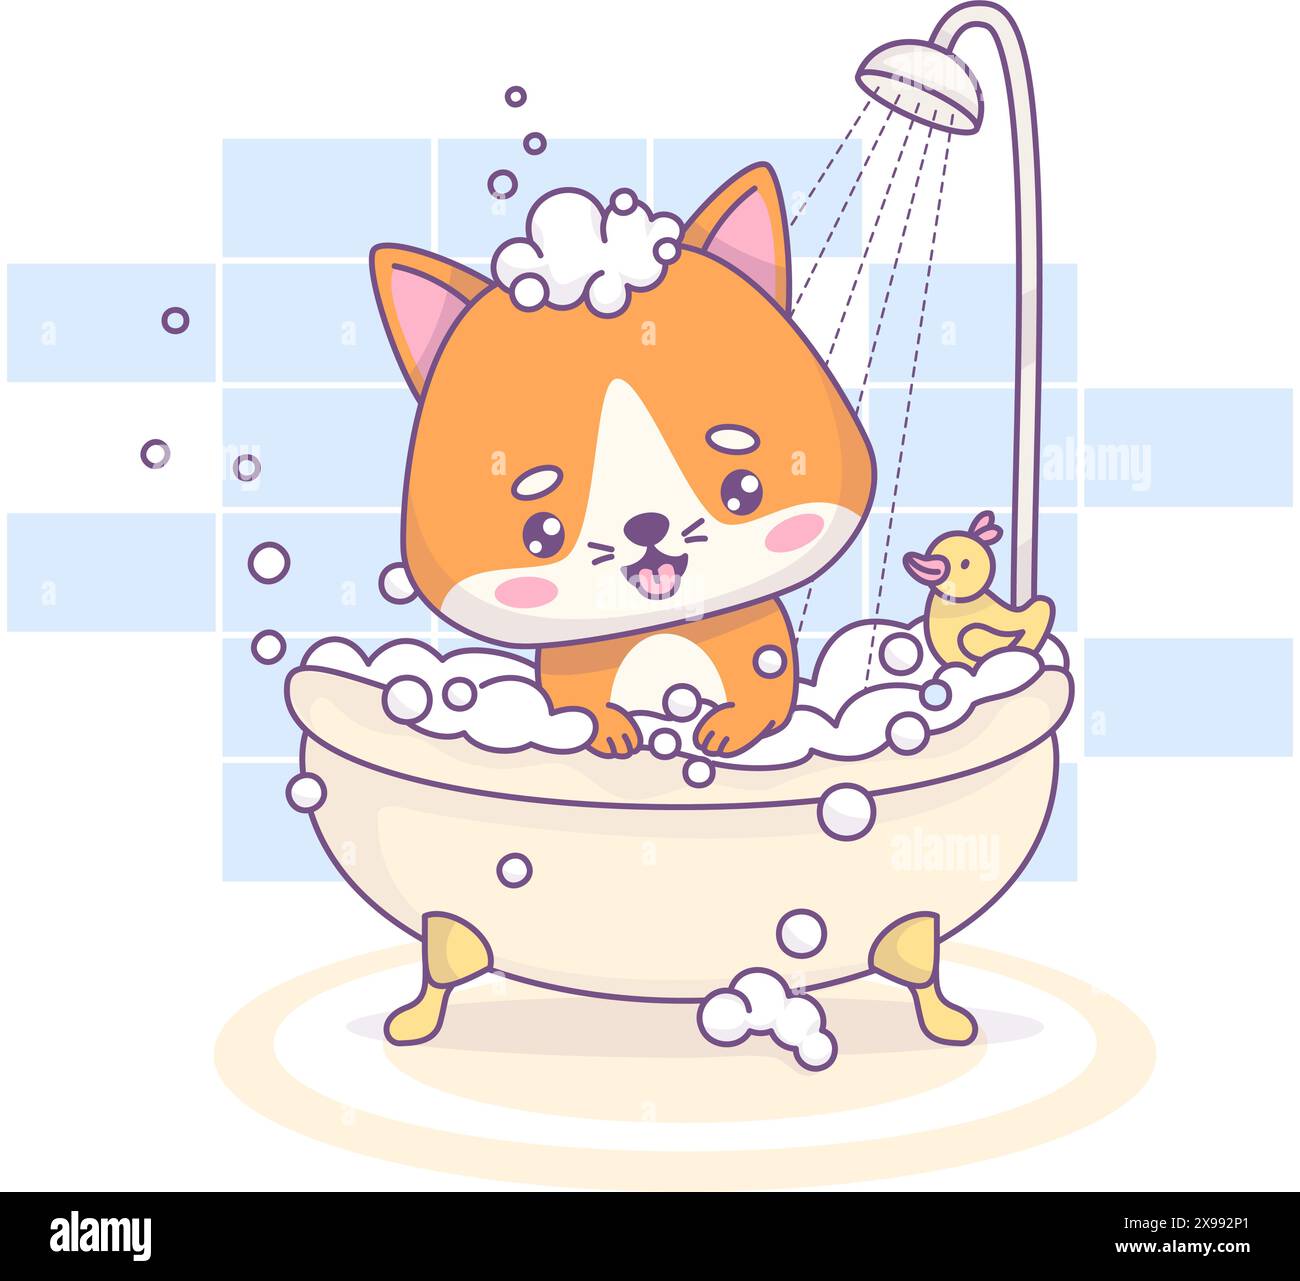 Funny red cat bathes in bath with foam in shower. Cute cartoon kawaii pet character. Vector illustration. Kids collection. Bathing, hygiene and beauty Stock Vector